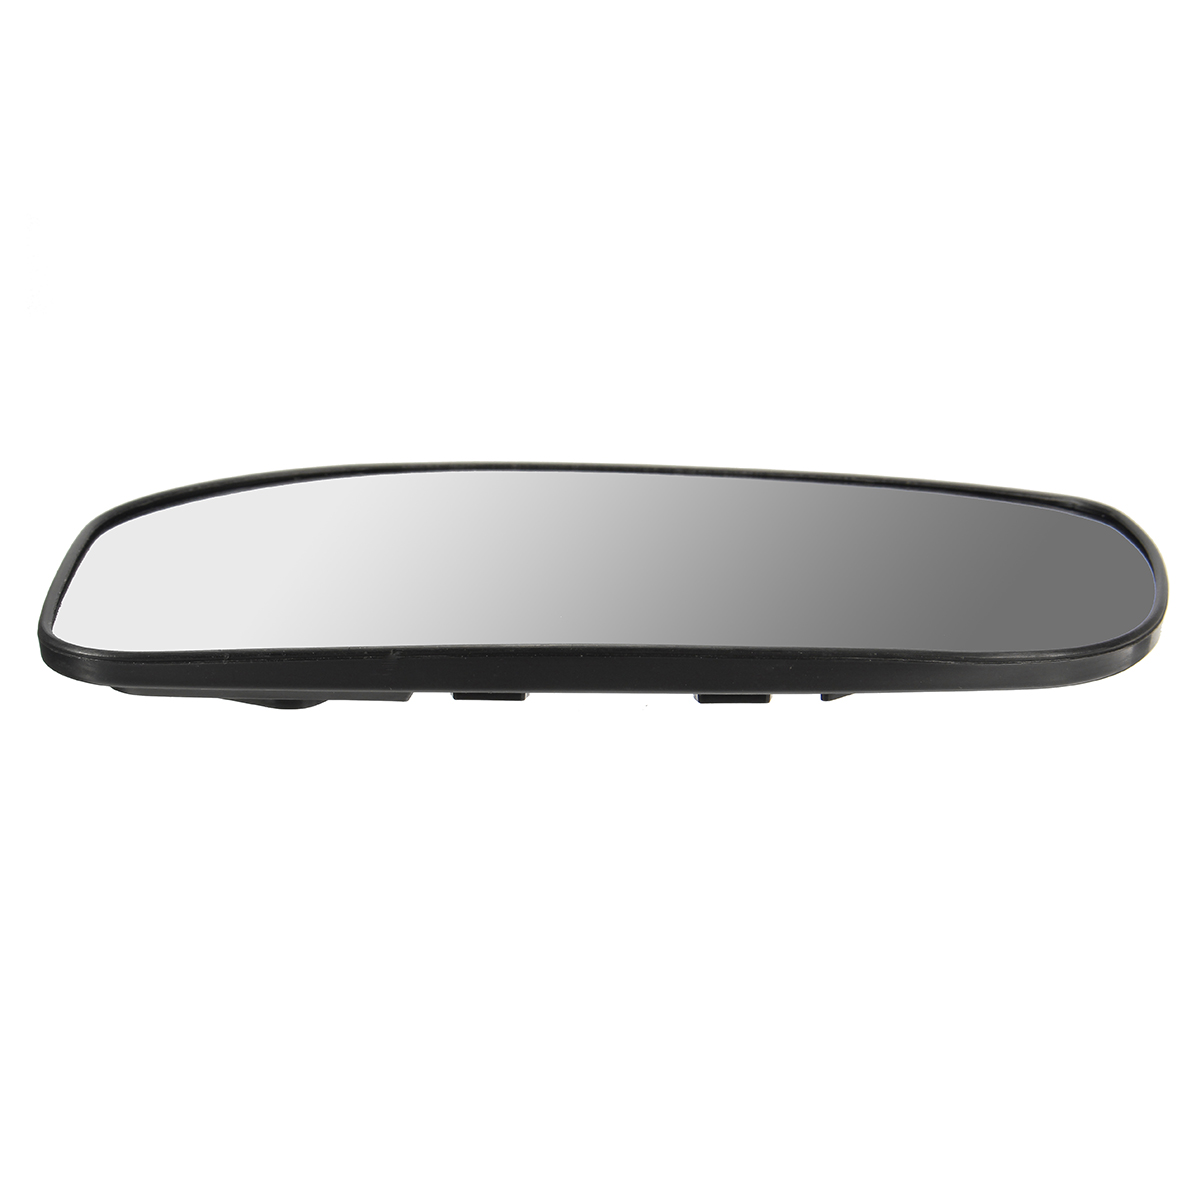 Car-Left-DoorWing-Mirror-Glass-Silver-Nonheated--Base-For-TOYOTA-YARIS-2006-2009-1195010